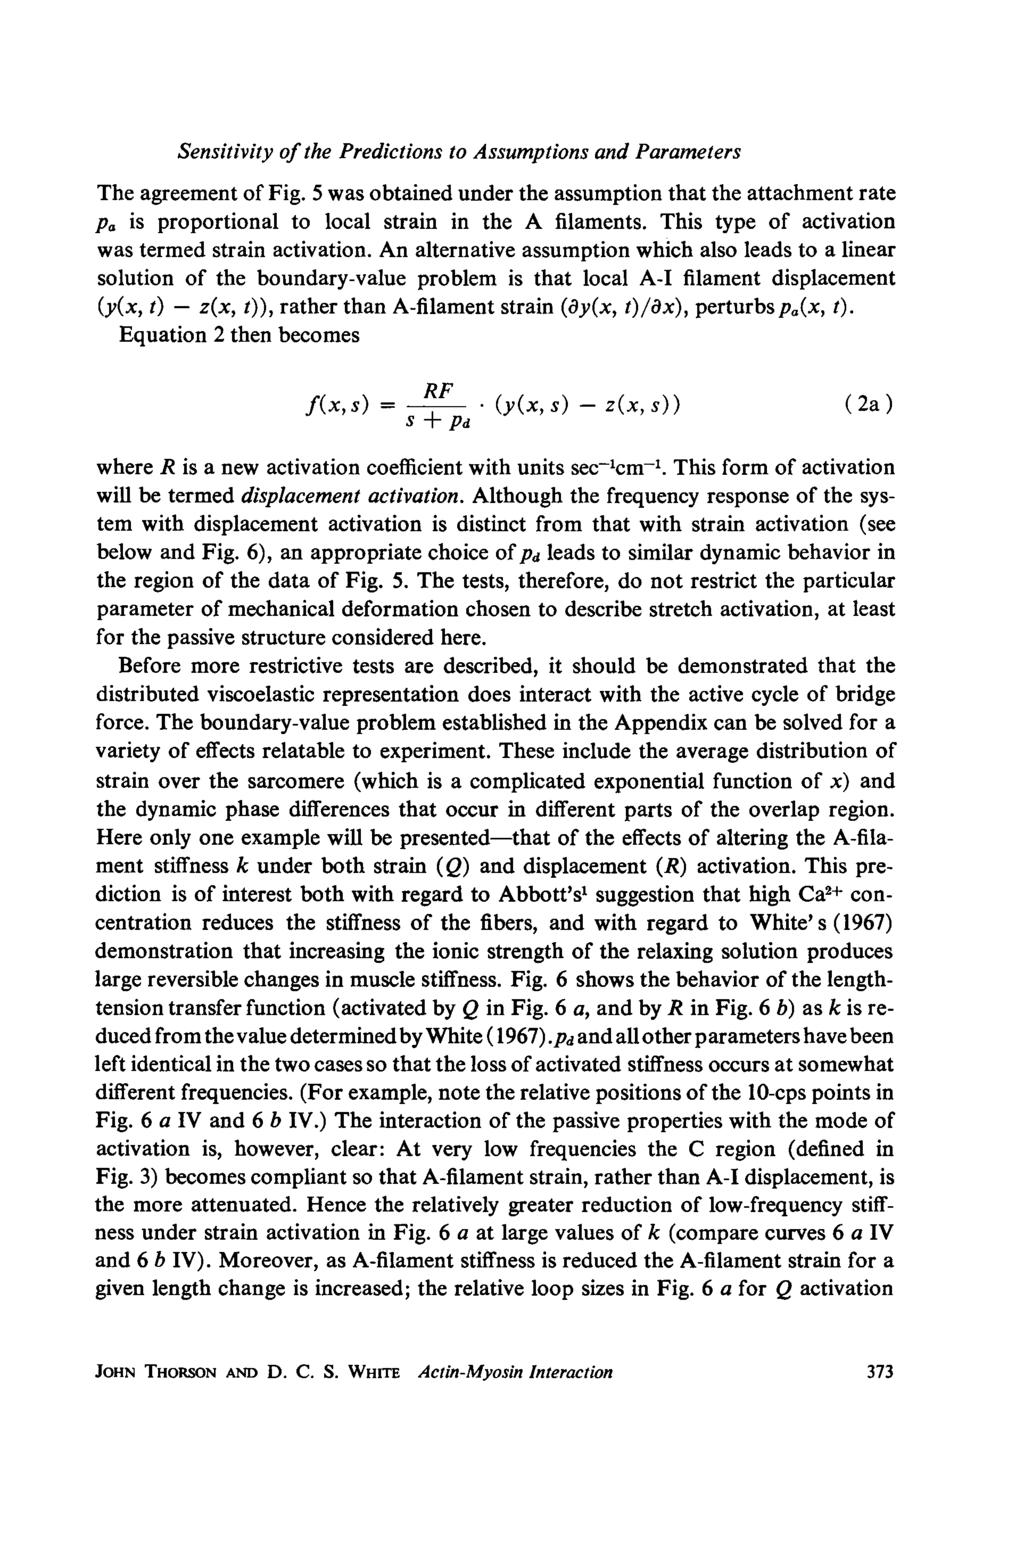 Sensitivity of the Predictions to Assumptions and Parameters The agreement of Fig. 5 was obtained under the assumption that the attachment rate Pa is proportional to local strain in the A filaments.